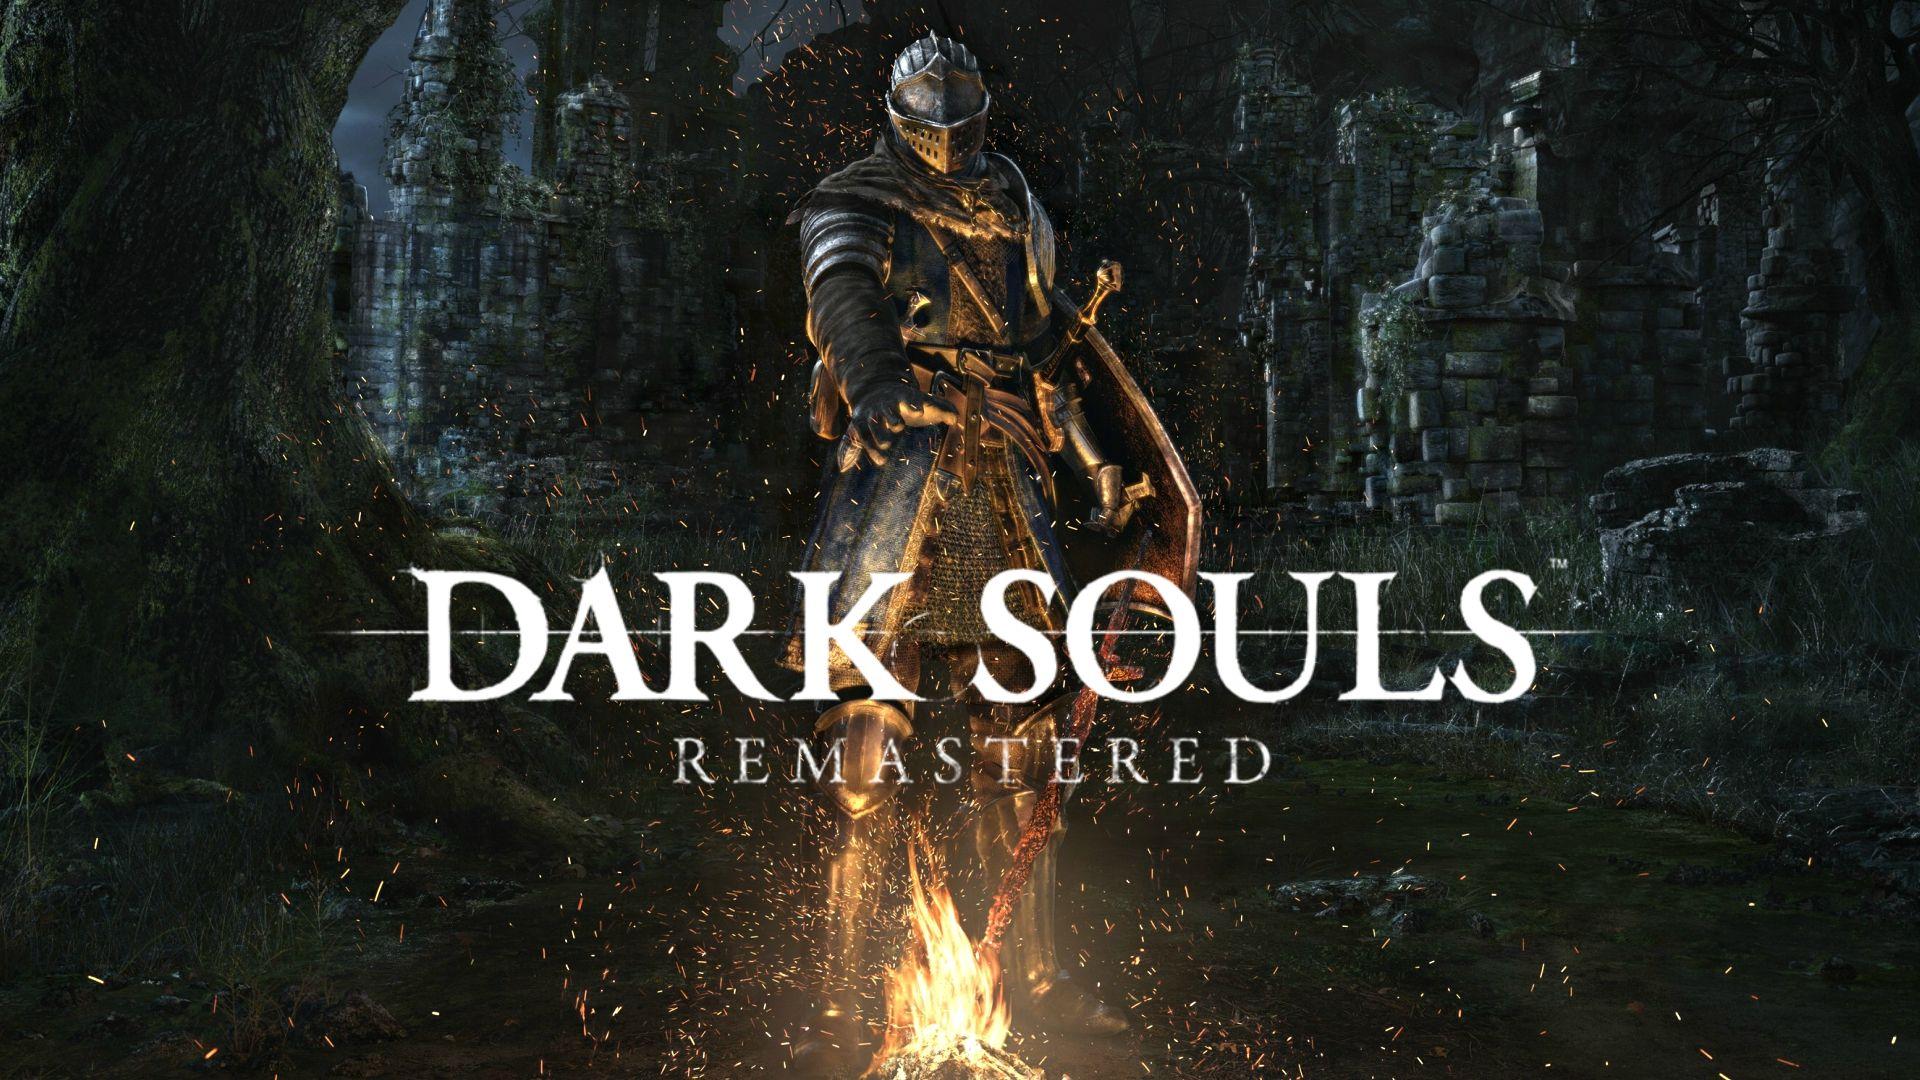 Let’s Play Dark Souls: Remastered